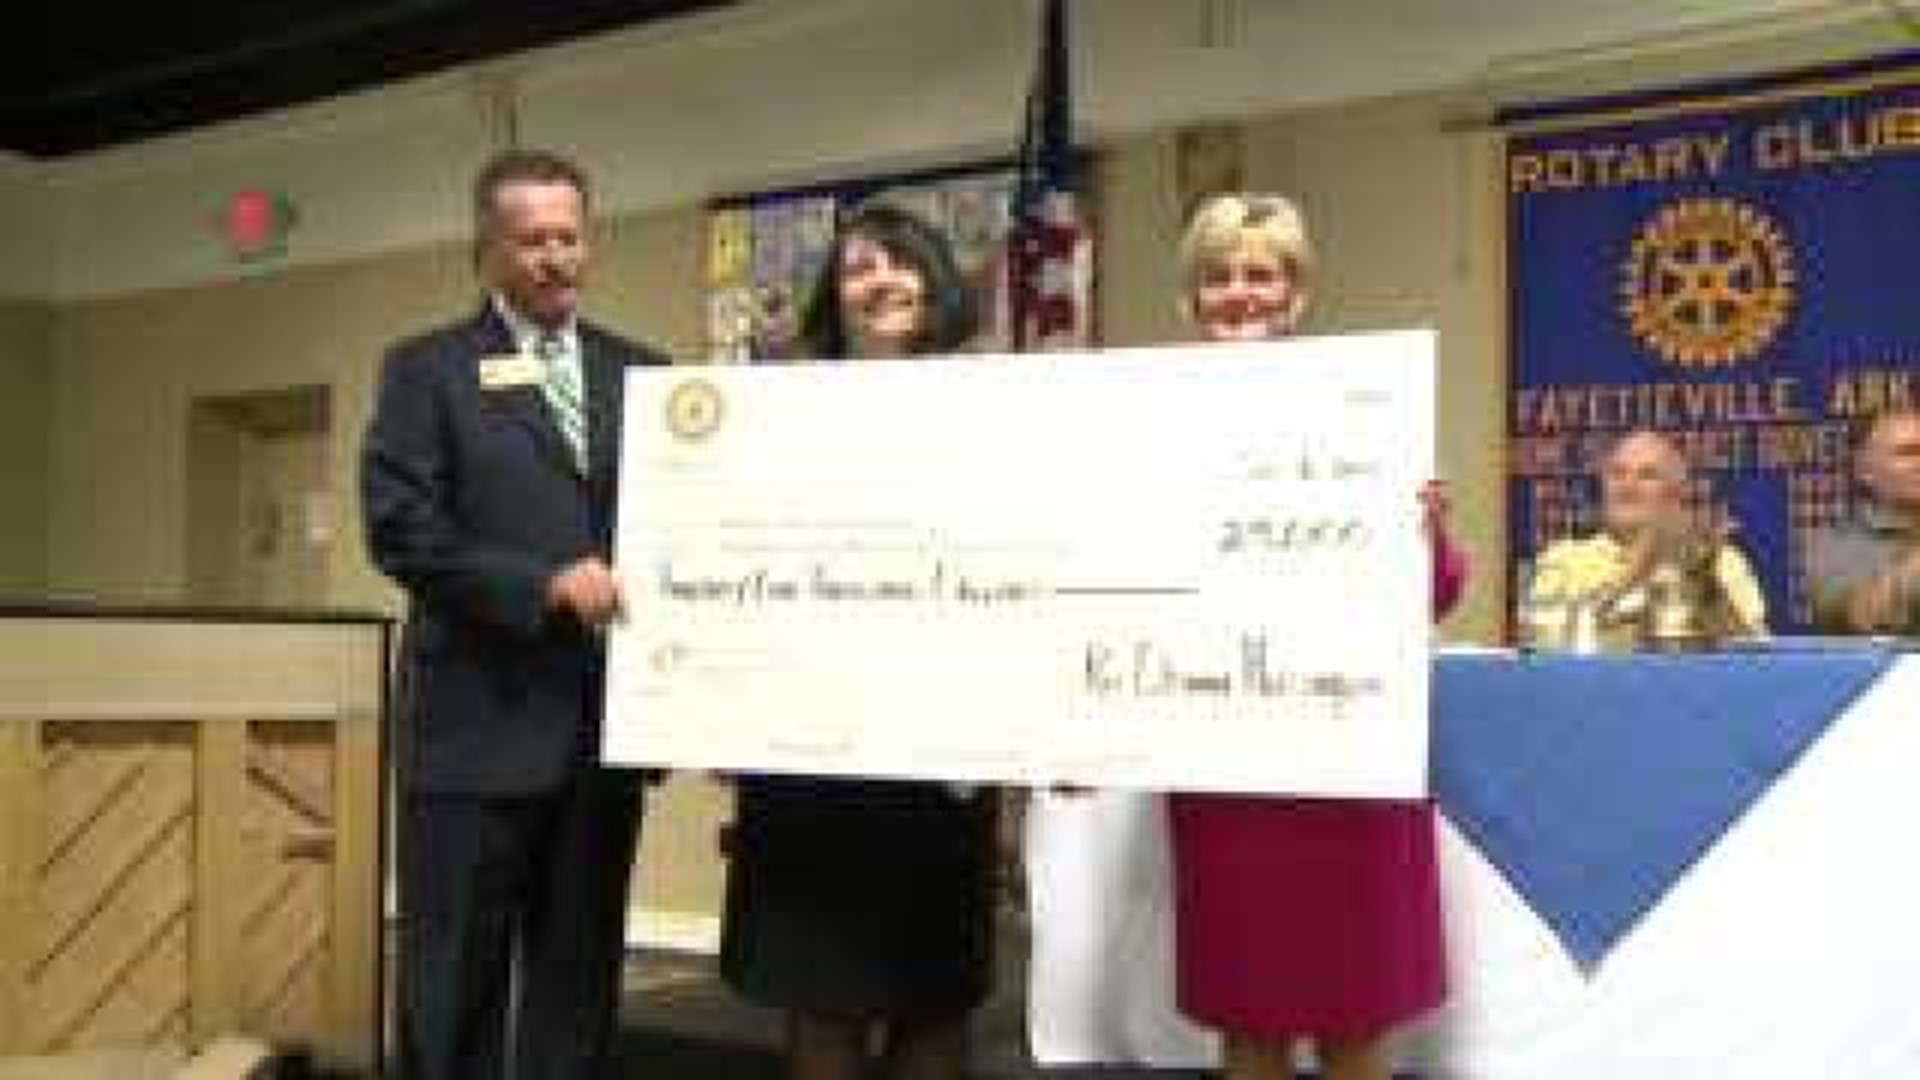 National Child Protection Traing Center Receives $25,000 grant